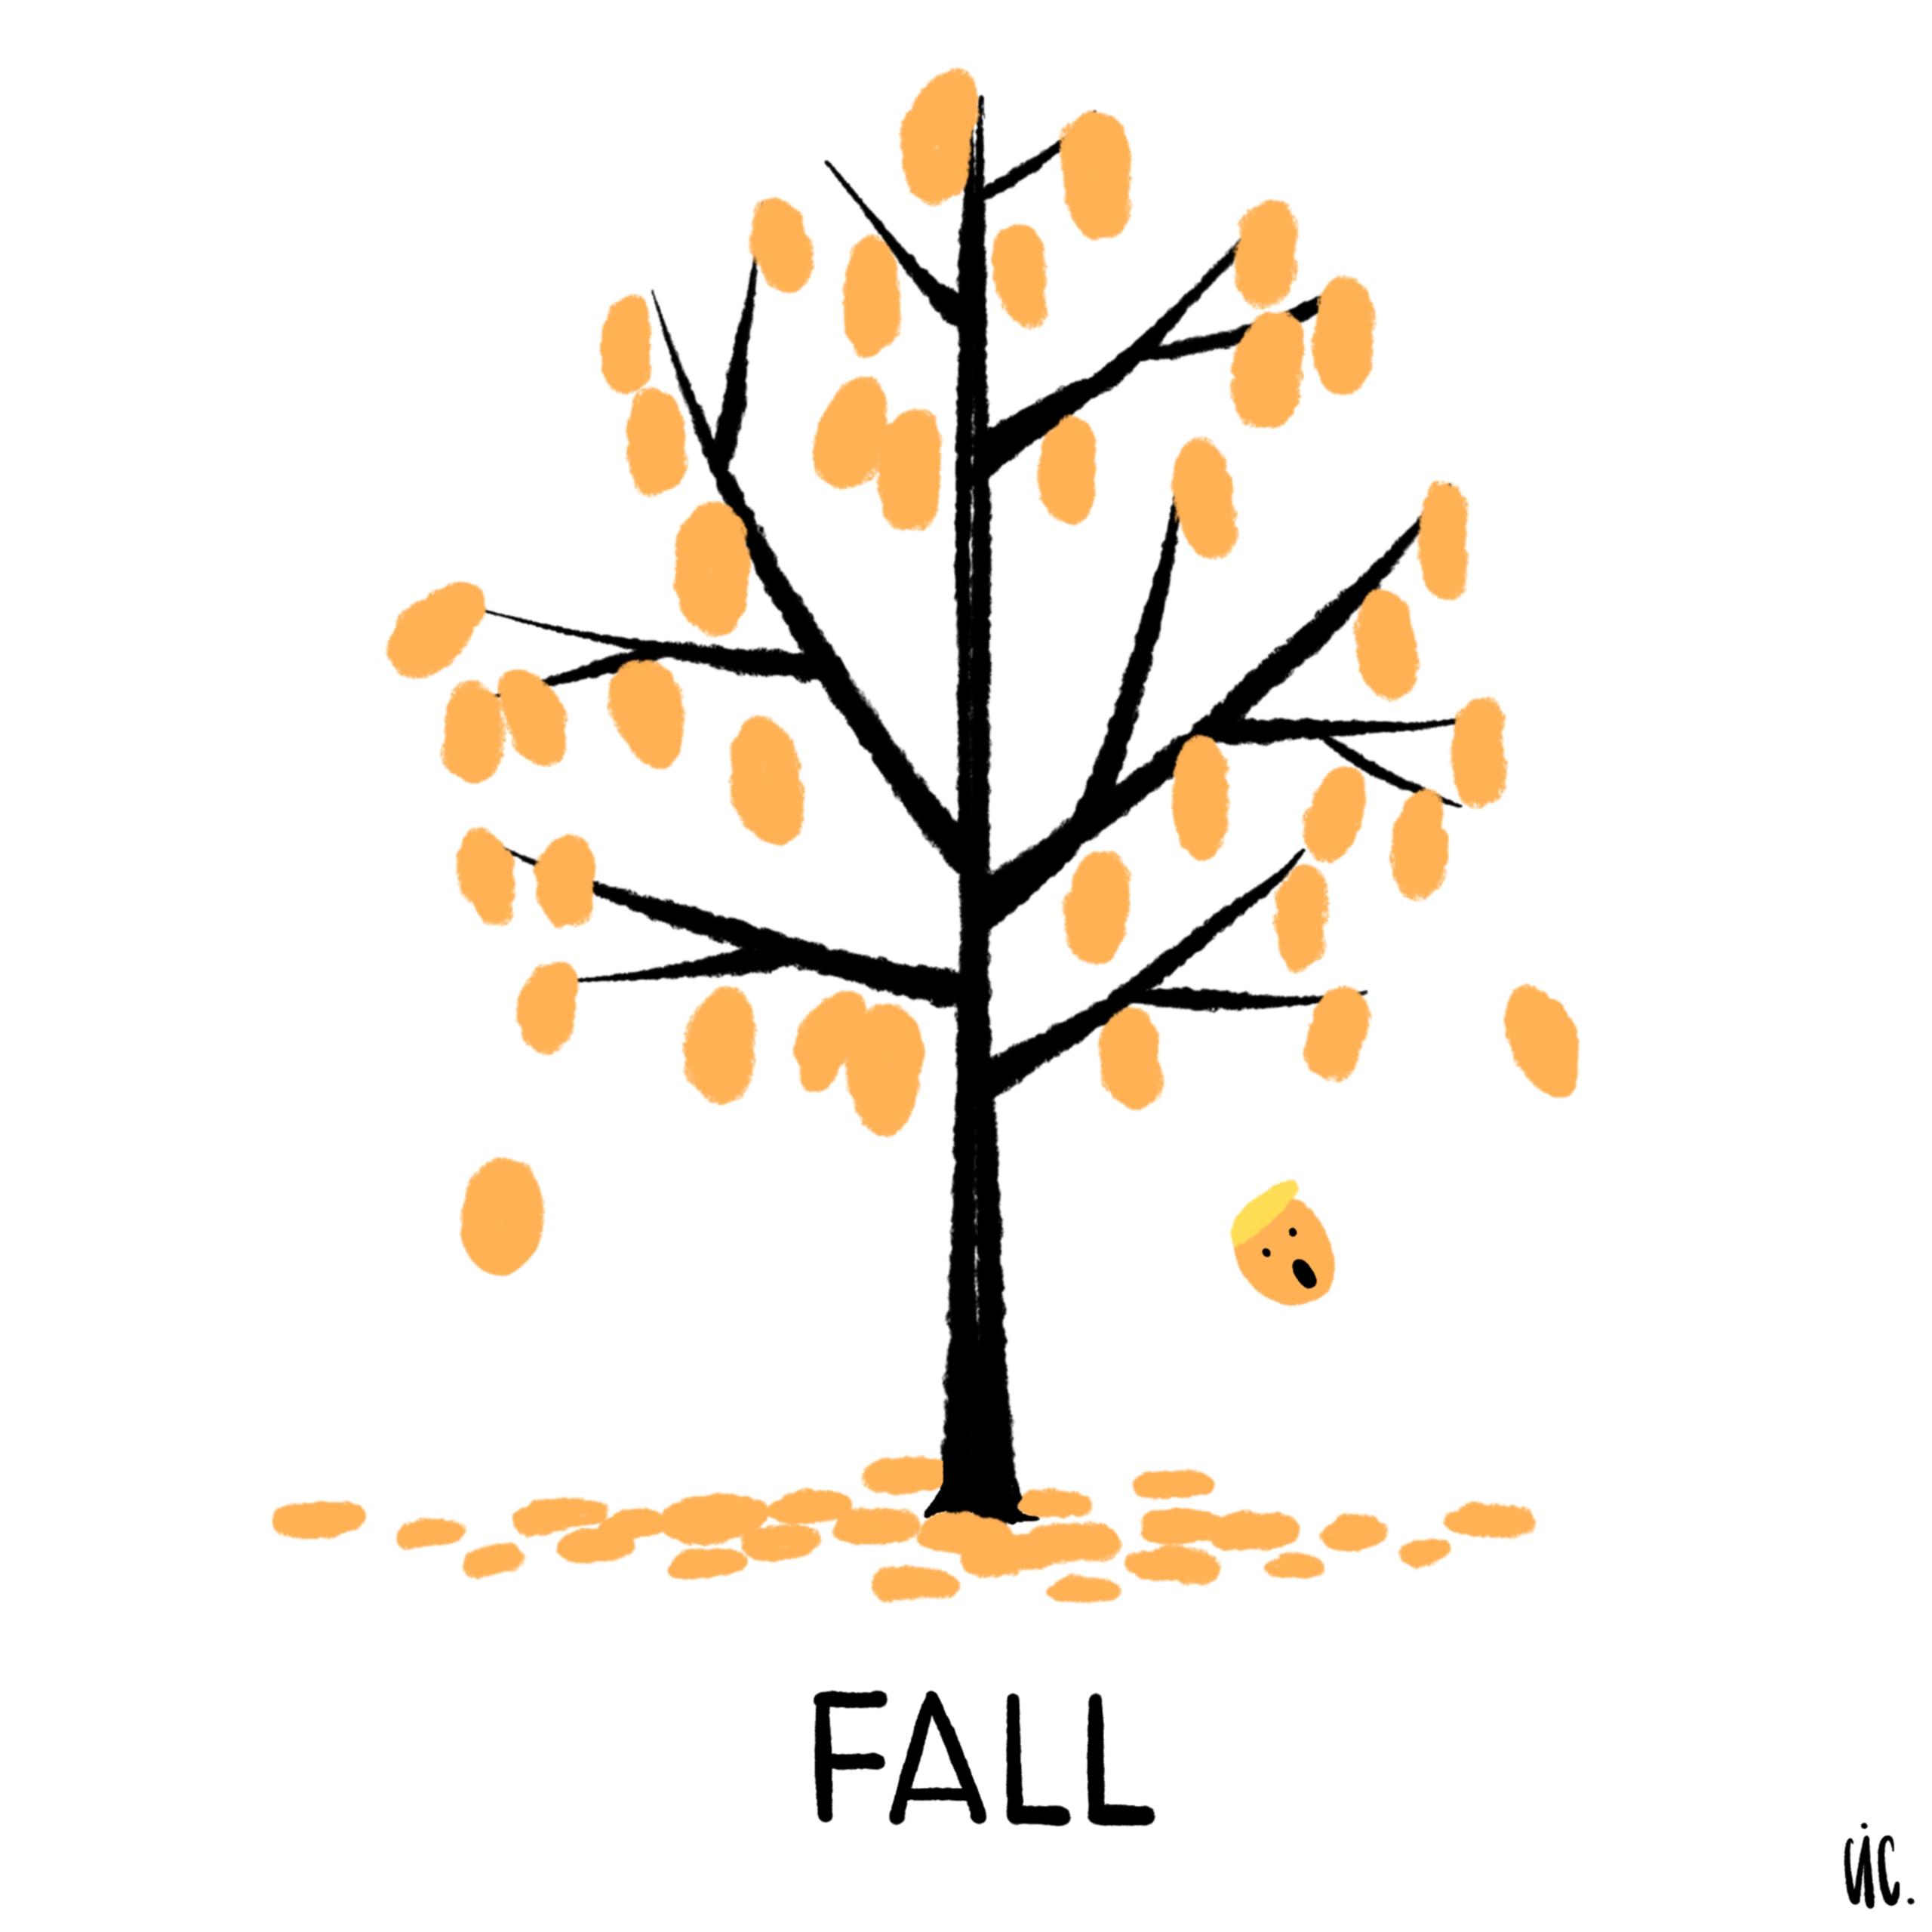 Trump leaf falls to the ground